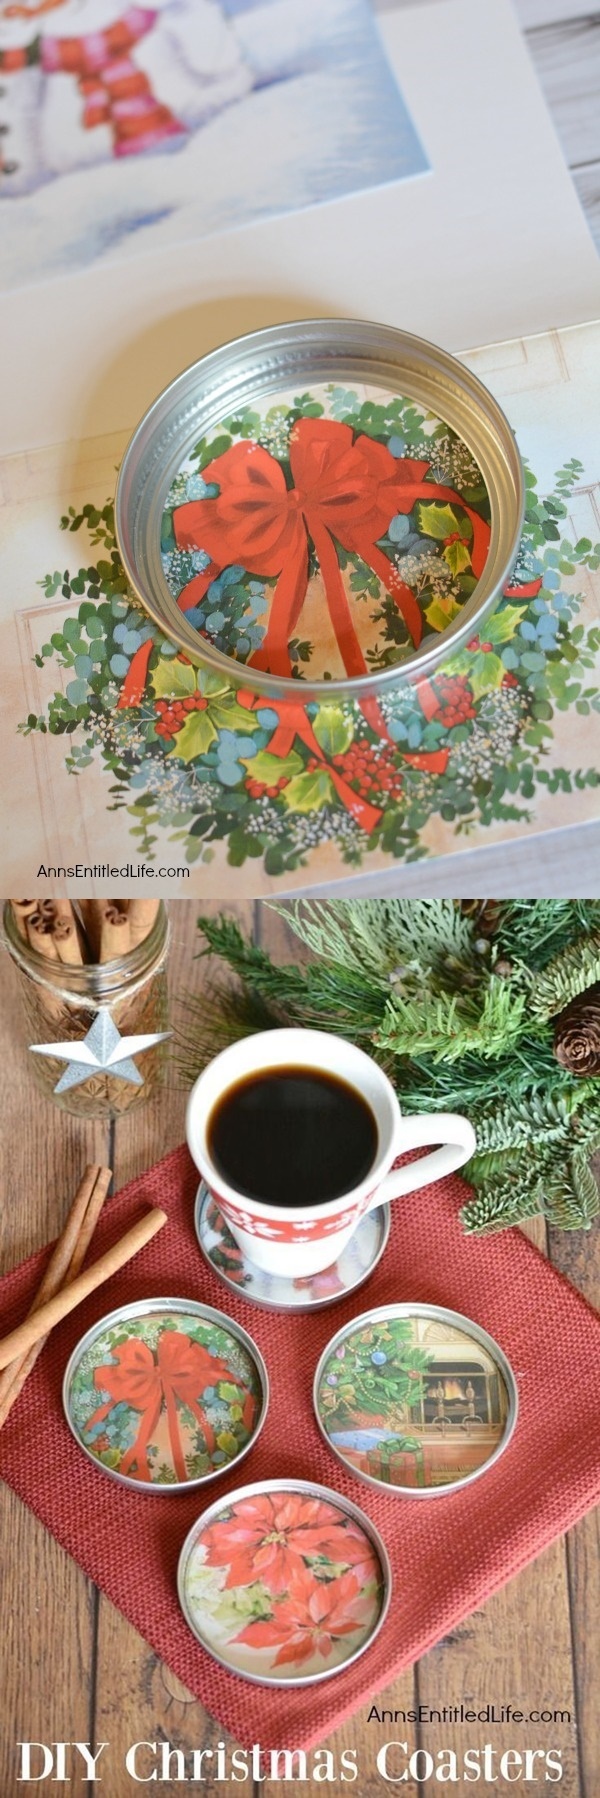 Crafts to make with Old Greeting Cards